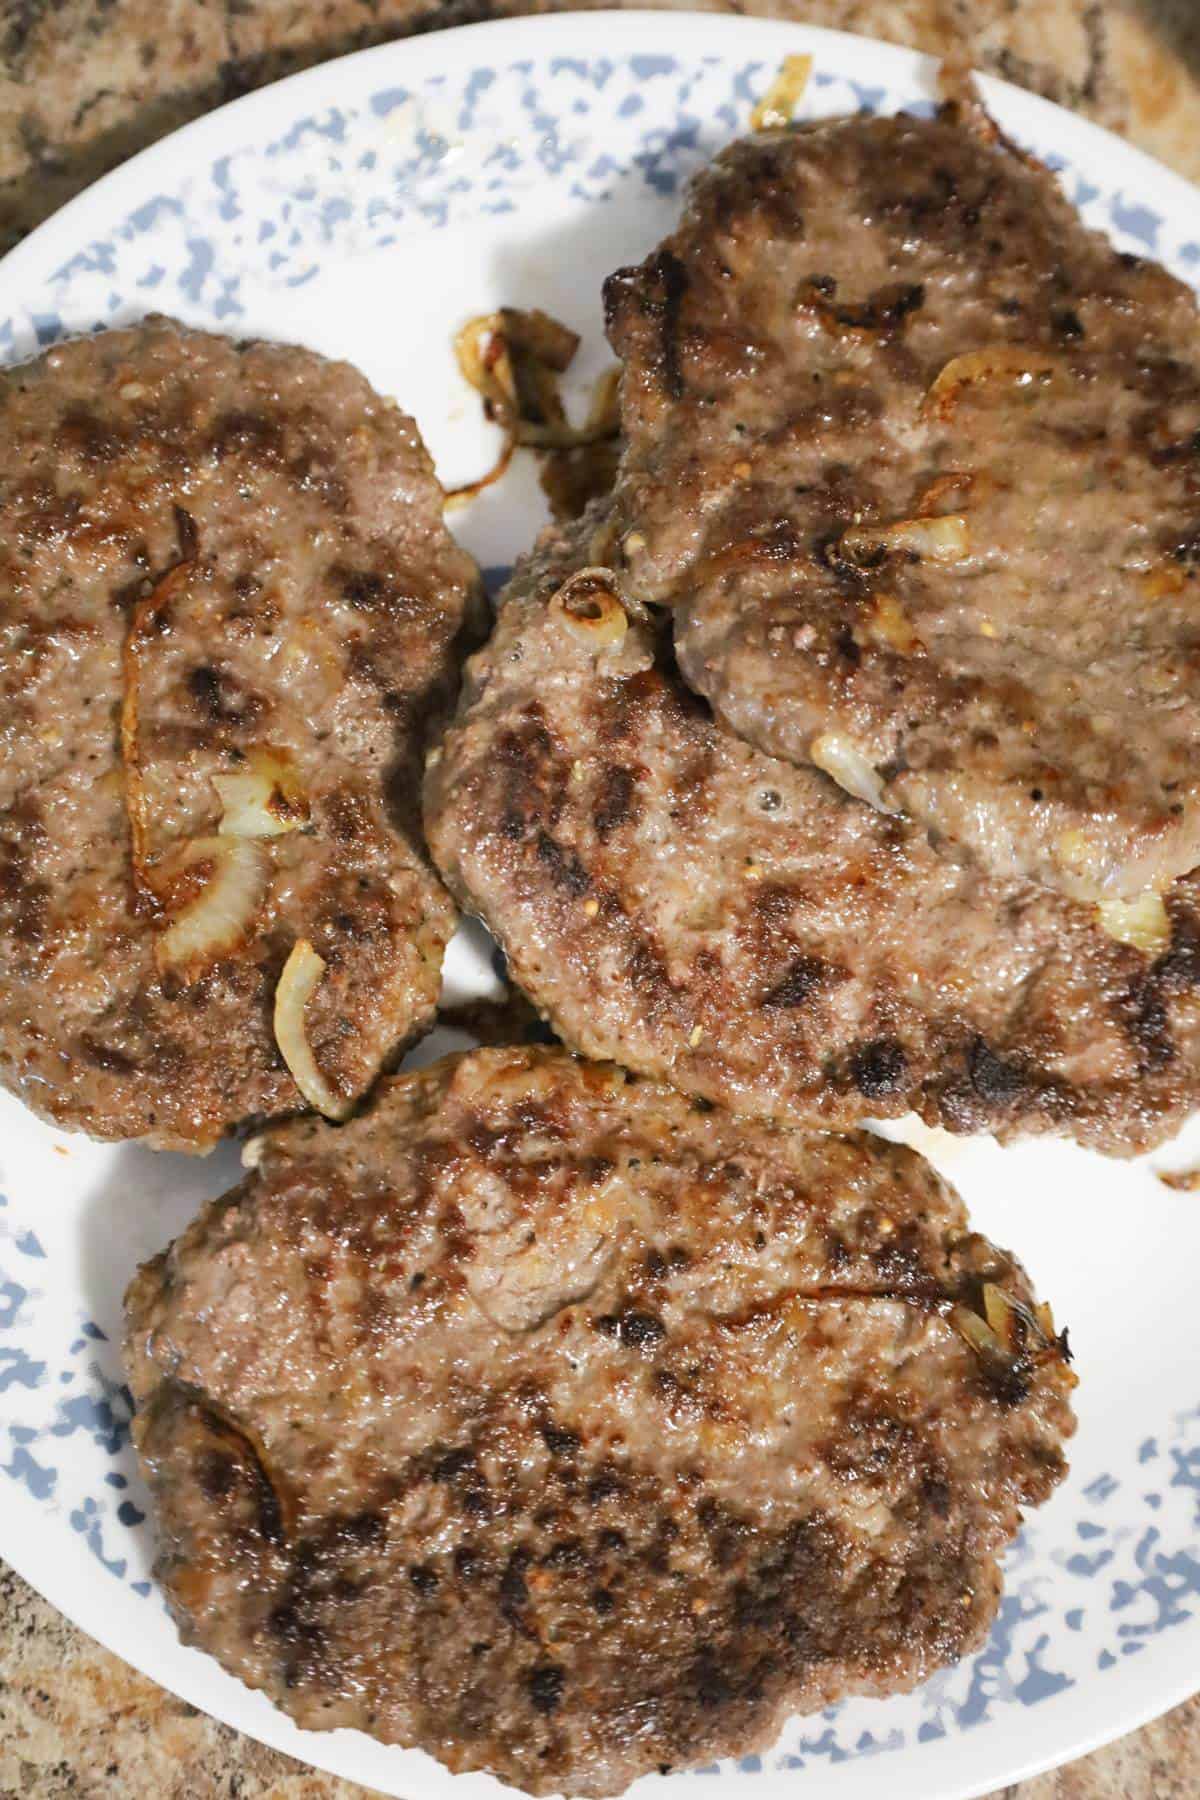 cooked hamburger patties on a plate